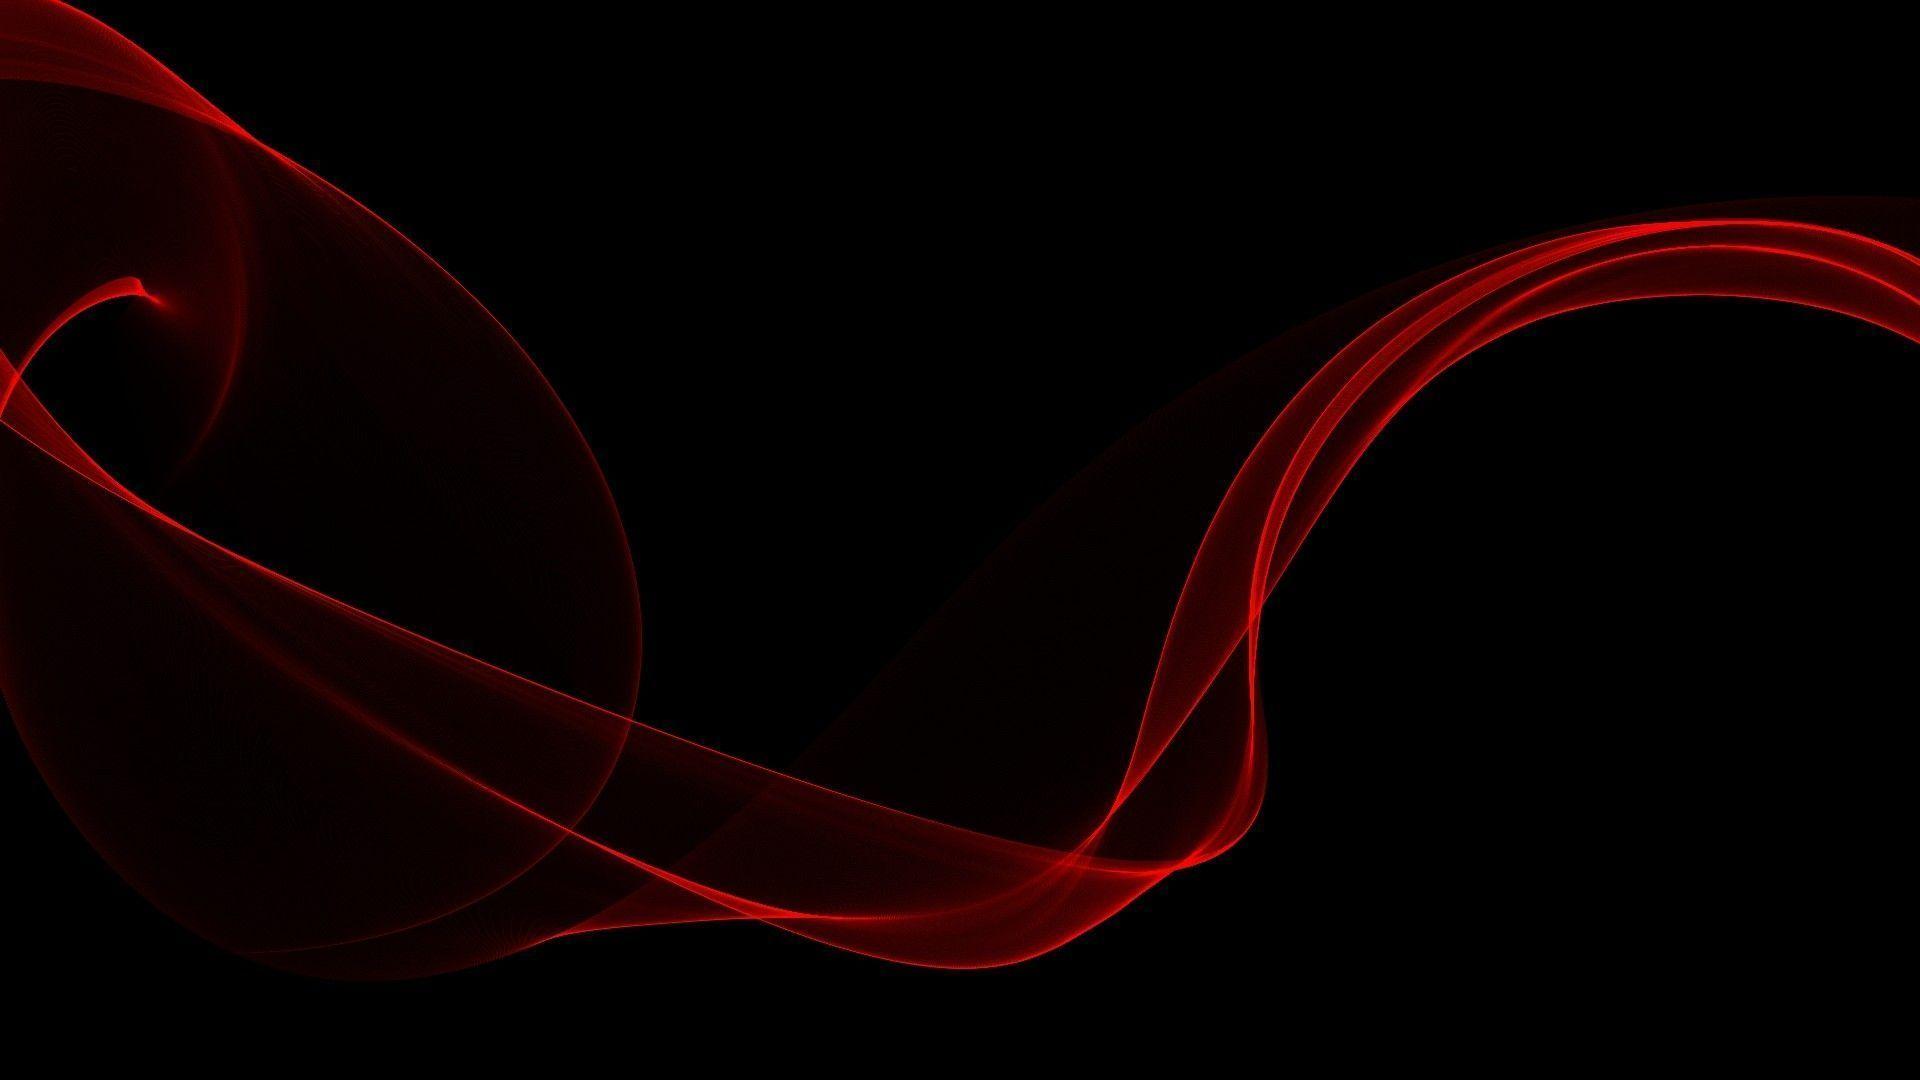 Black And Red Abstract Wallpaper 19 - [1920x1080]